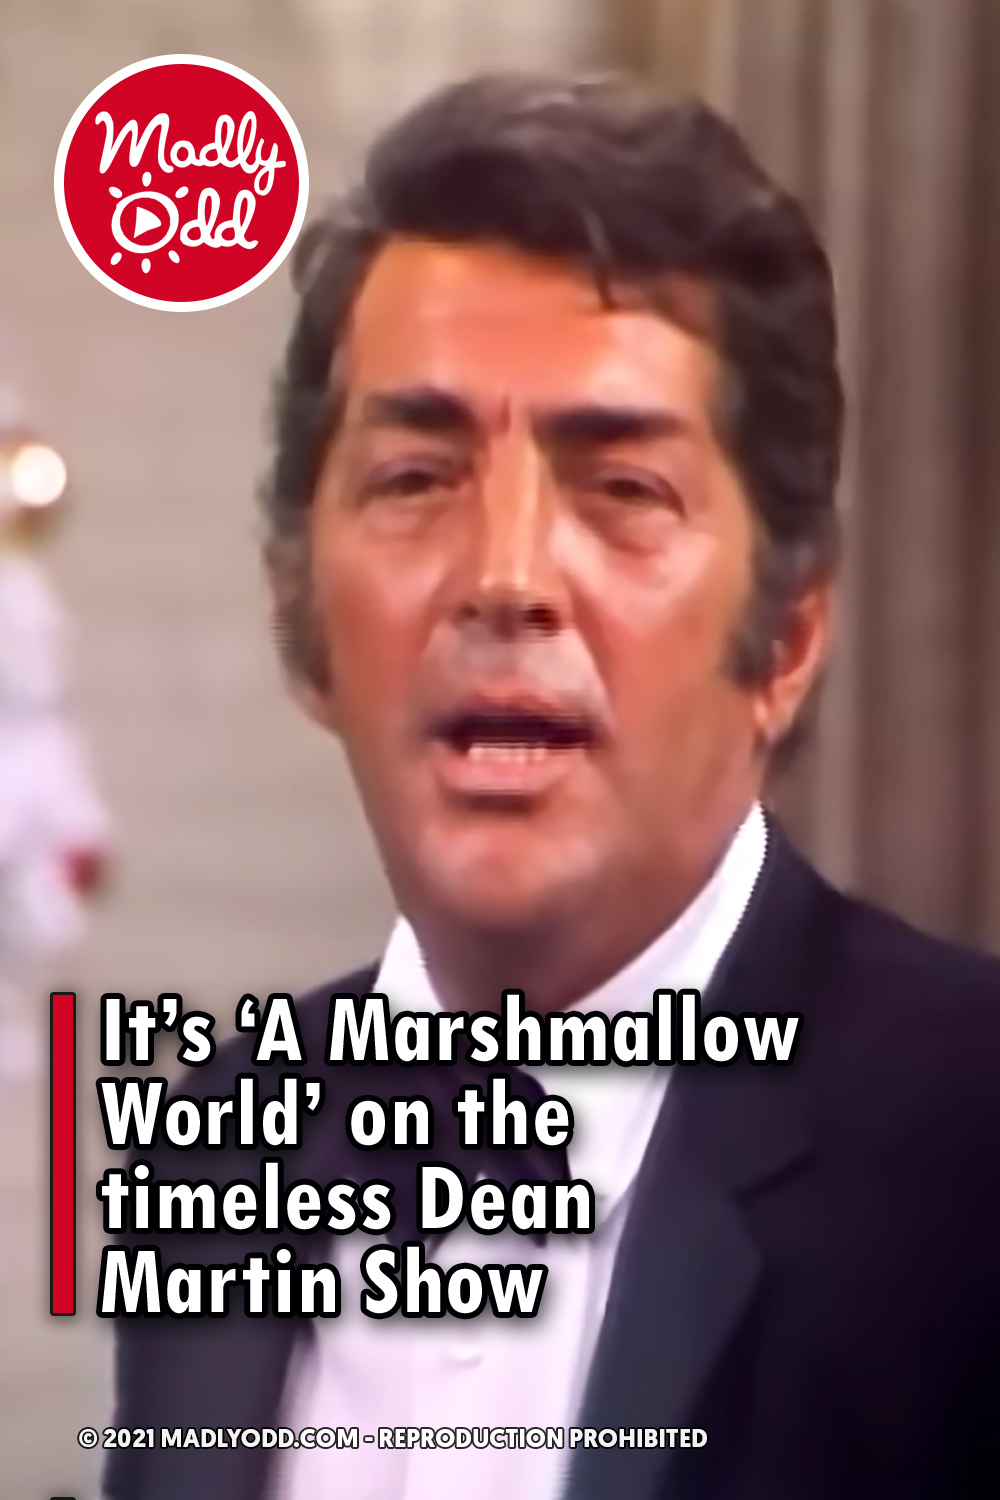 It’s ‘A Marshmallow World’ on the timeless Dean Martin Show